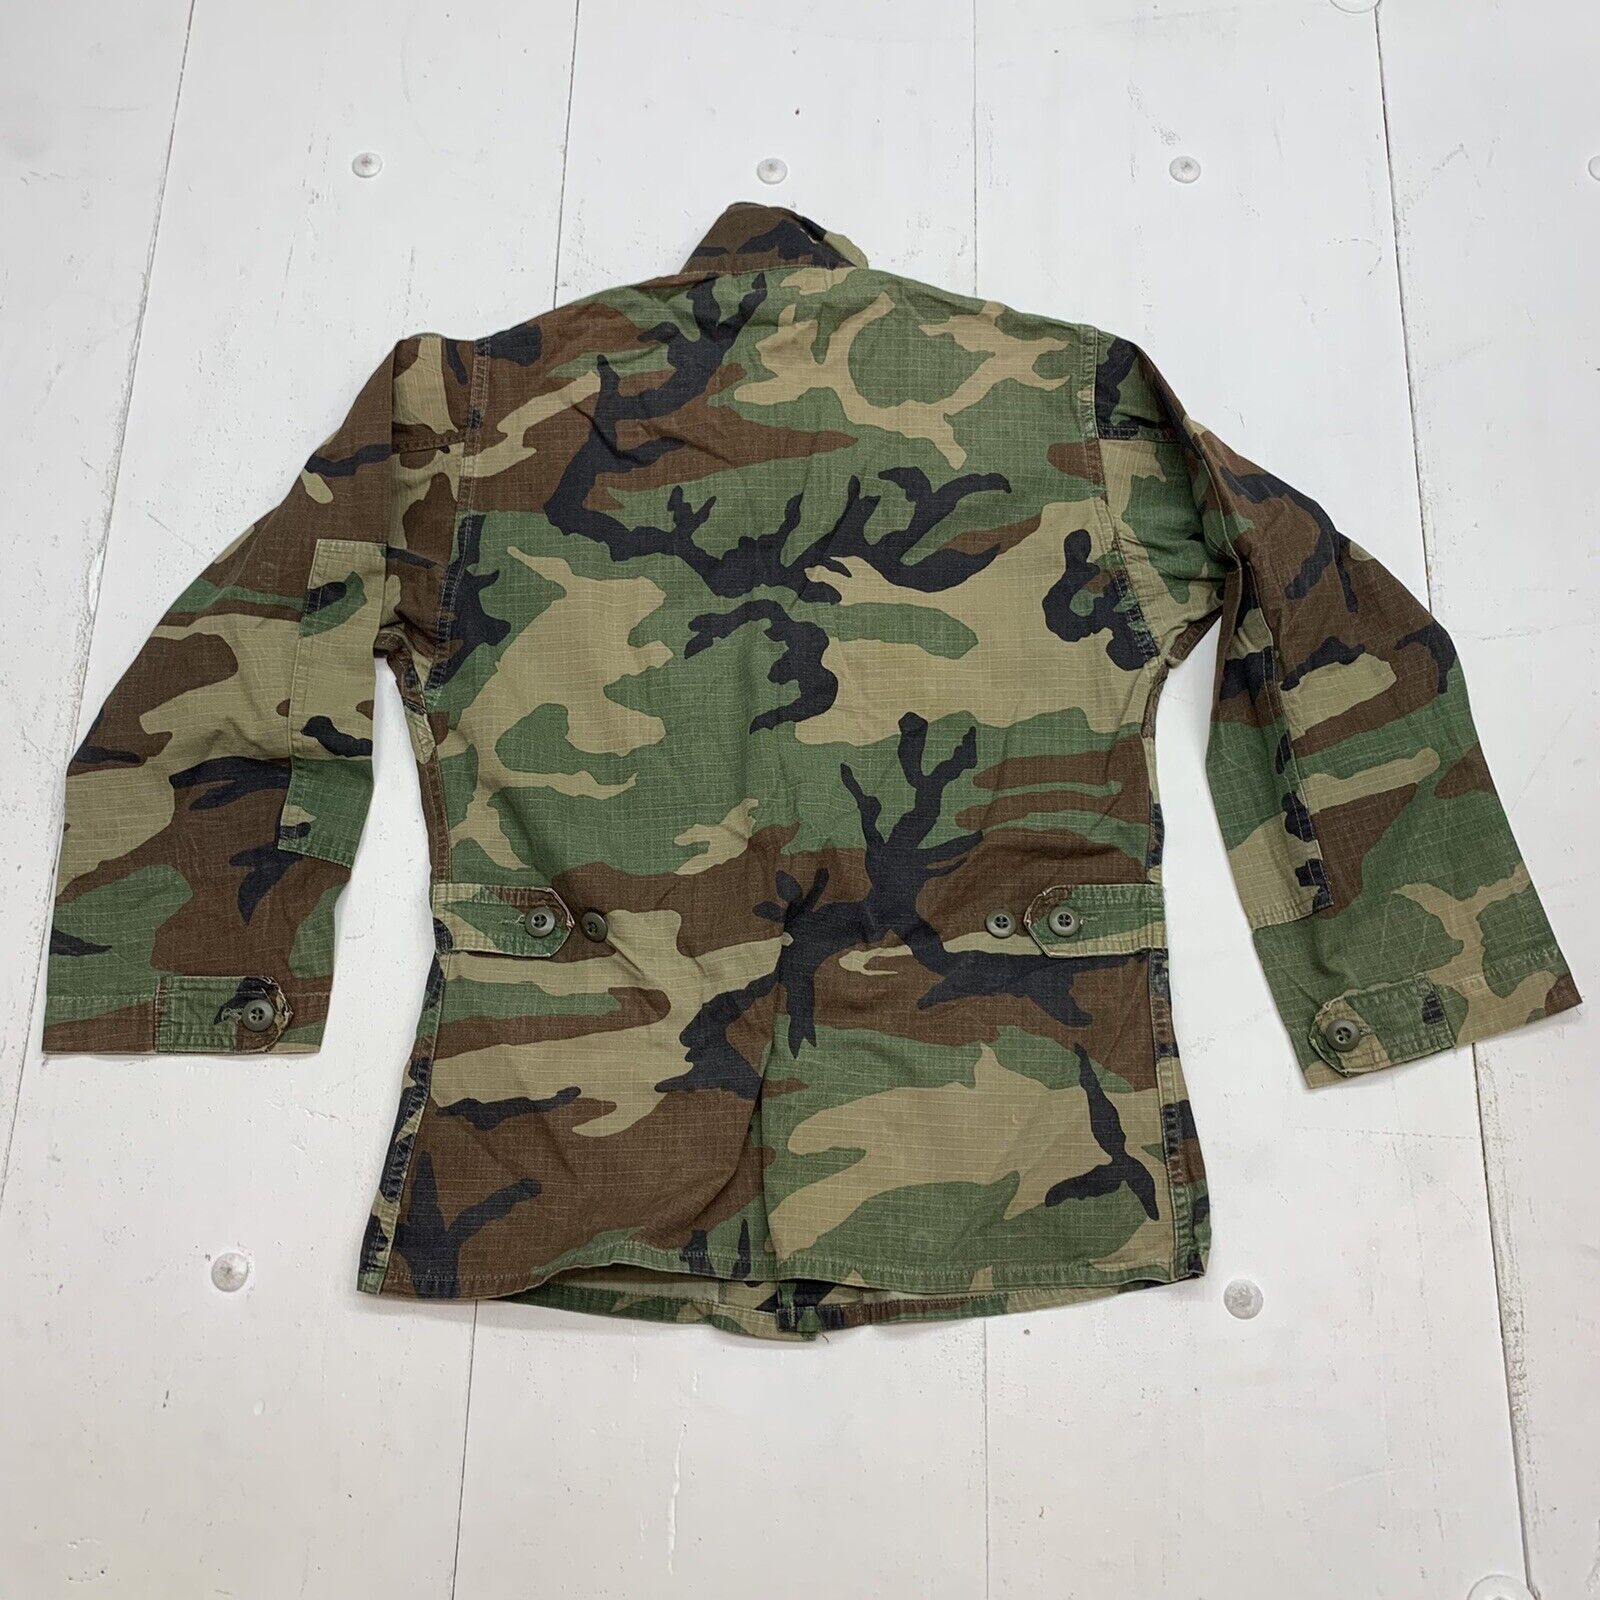 US Army Mens Green Camouflage long Sleeve Size X small short